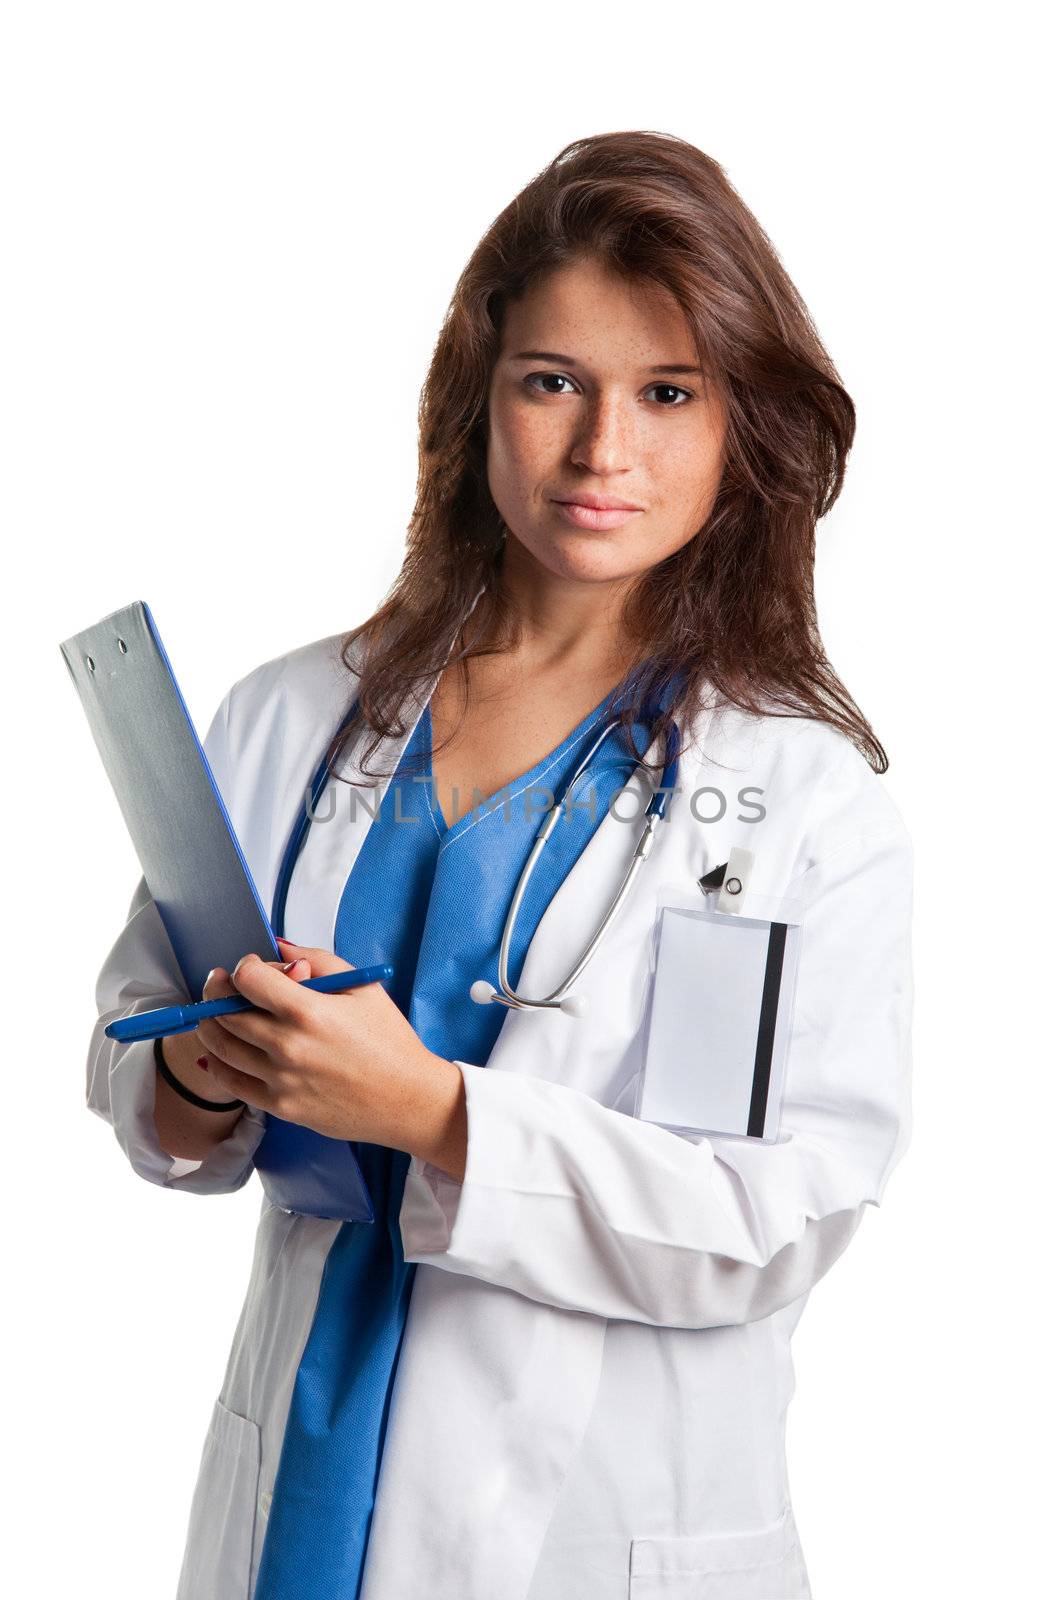 Young female doctor with scrubs and a stethoscope holding a notepad